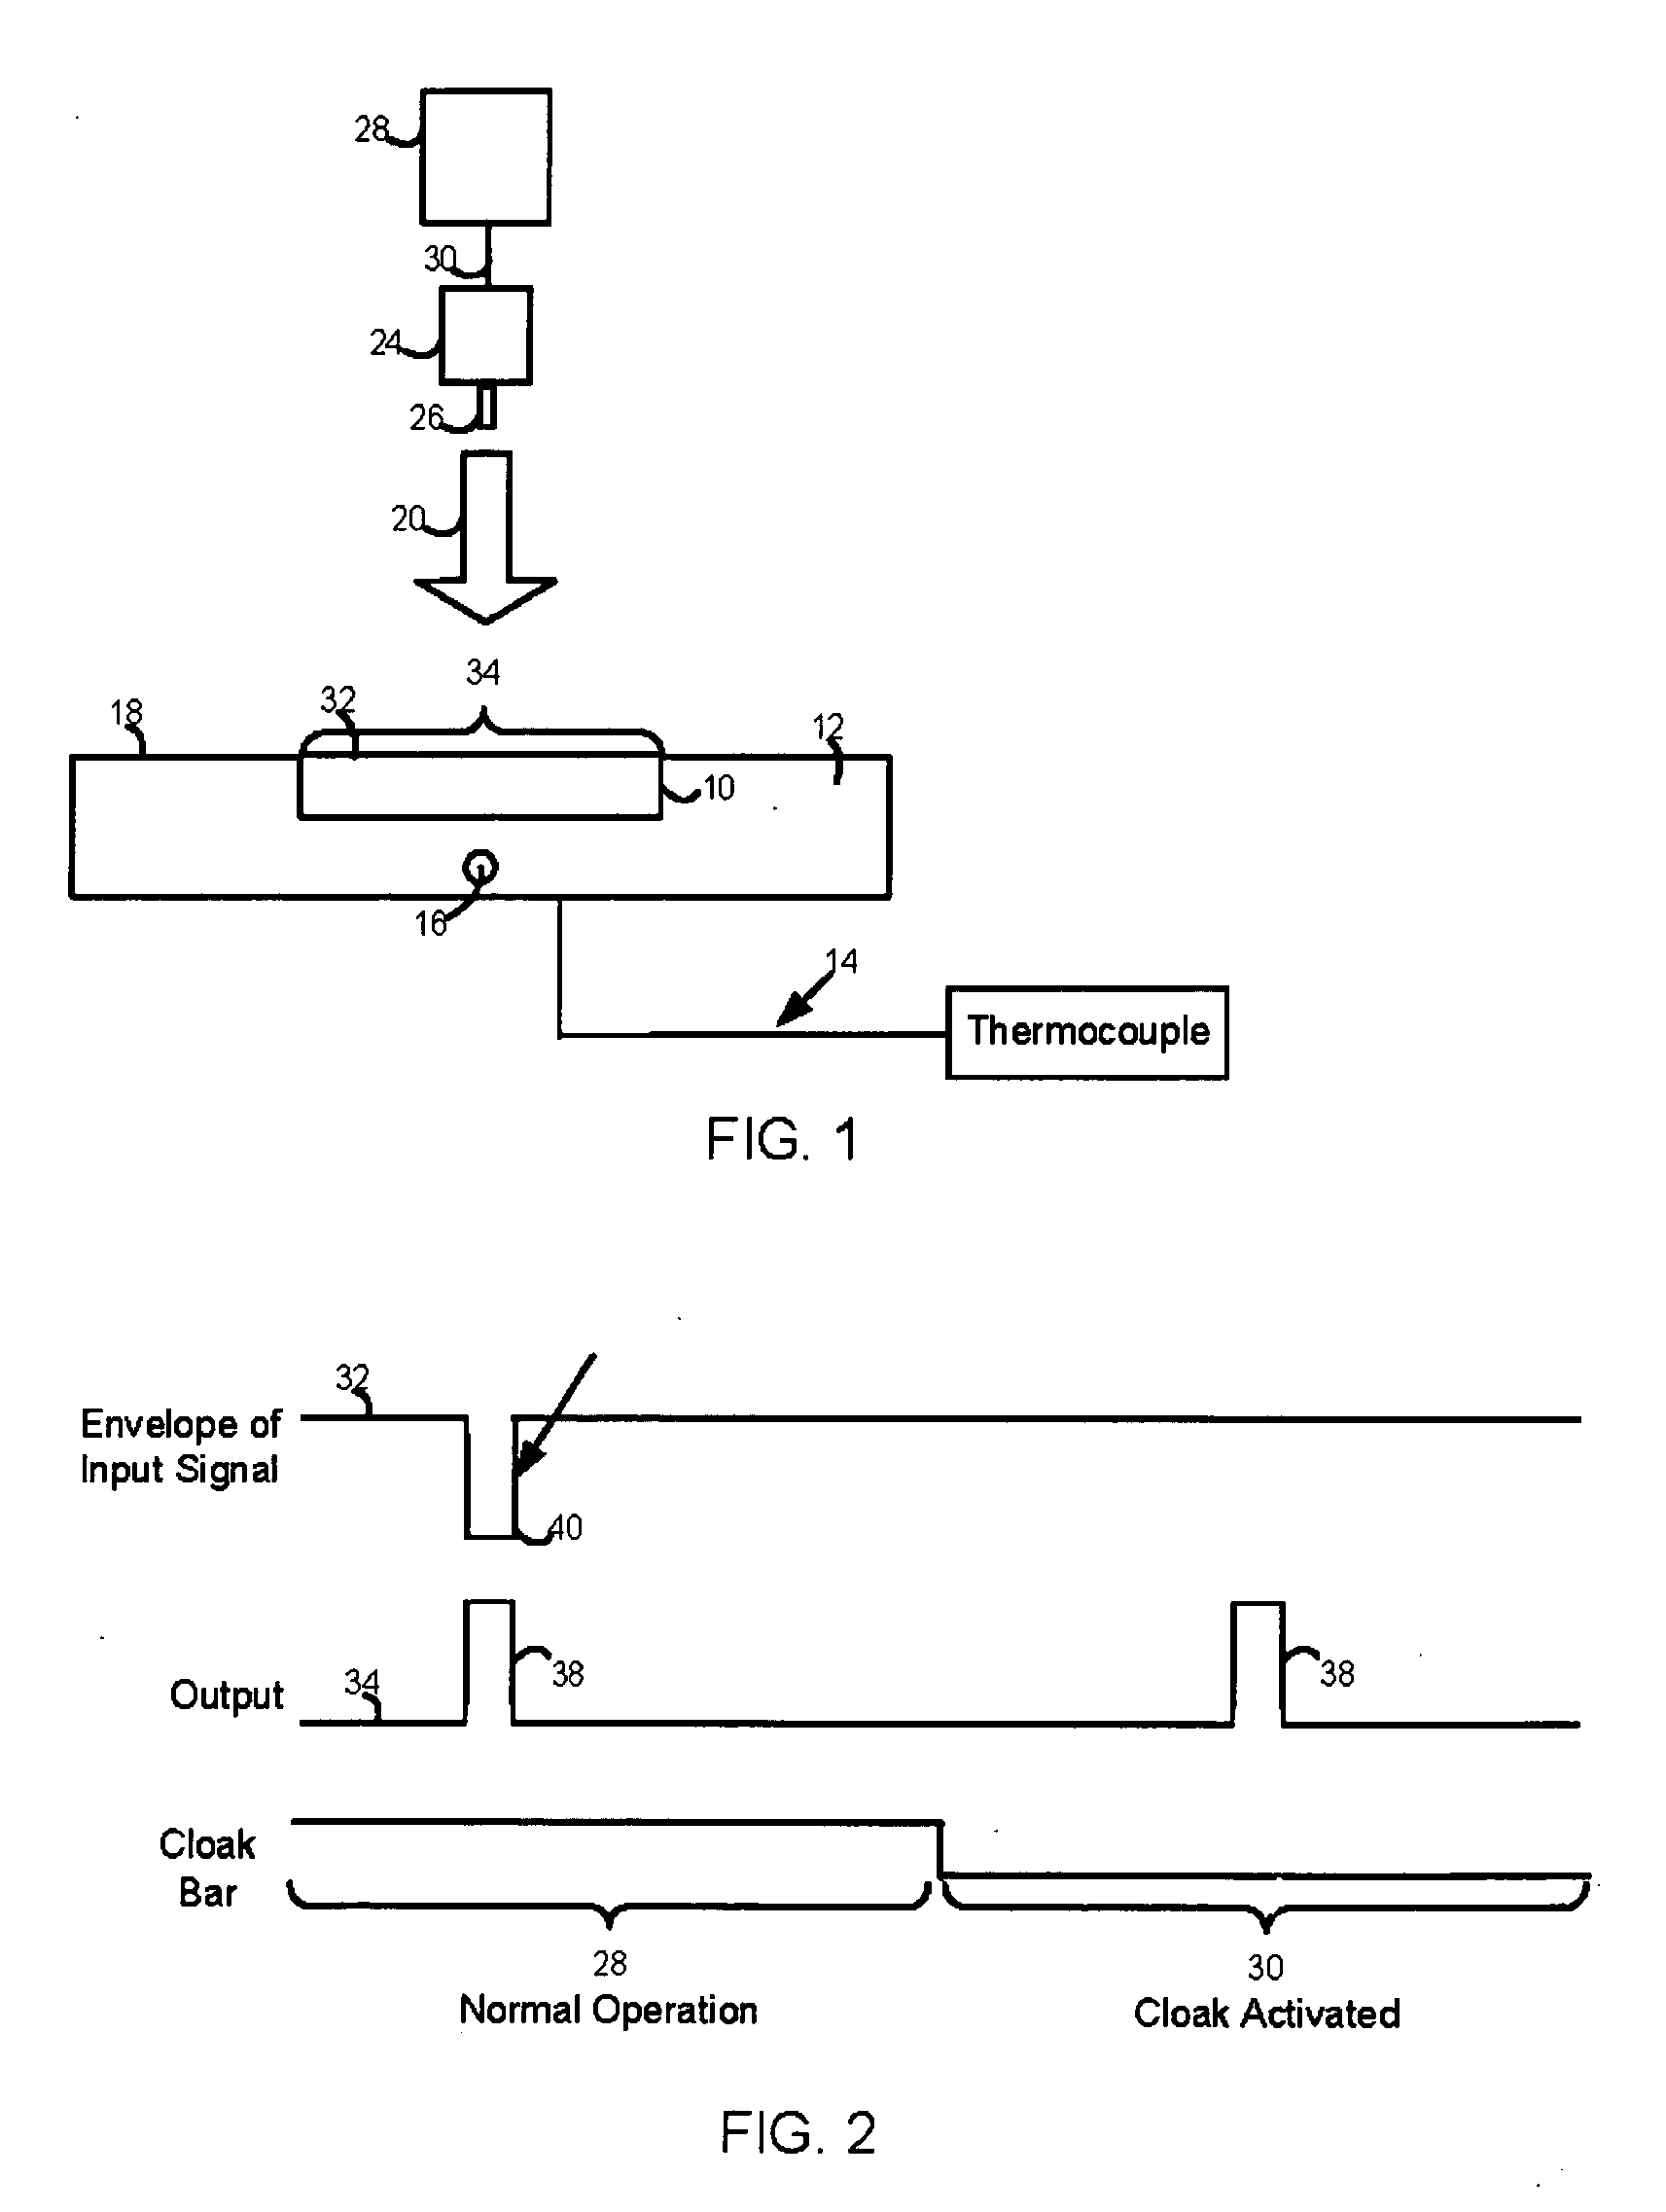 Selective cloaking circuit for use in radio frequency identification and method of cloaking RFID tags